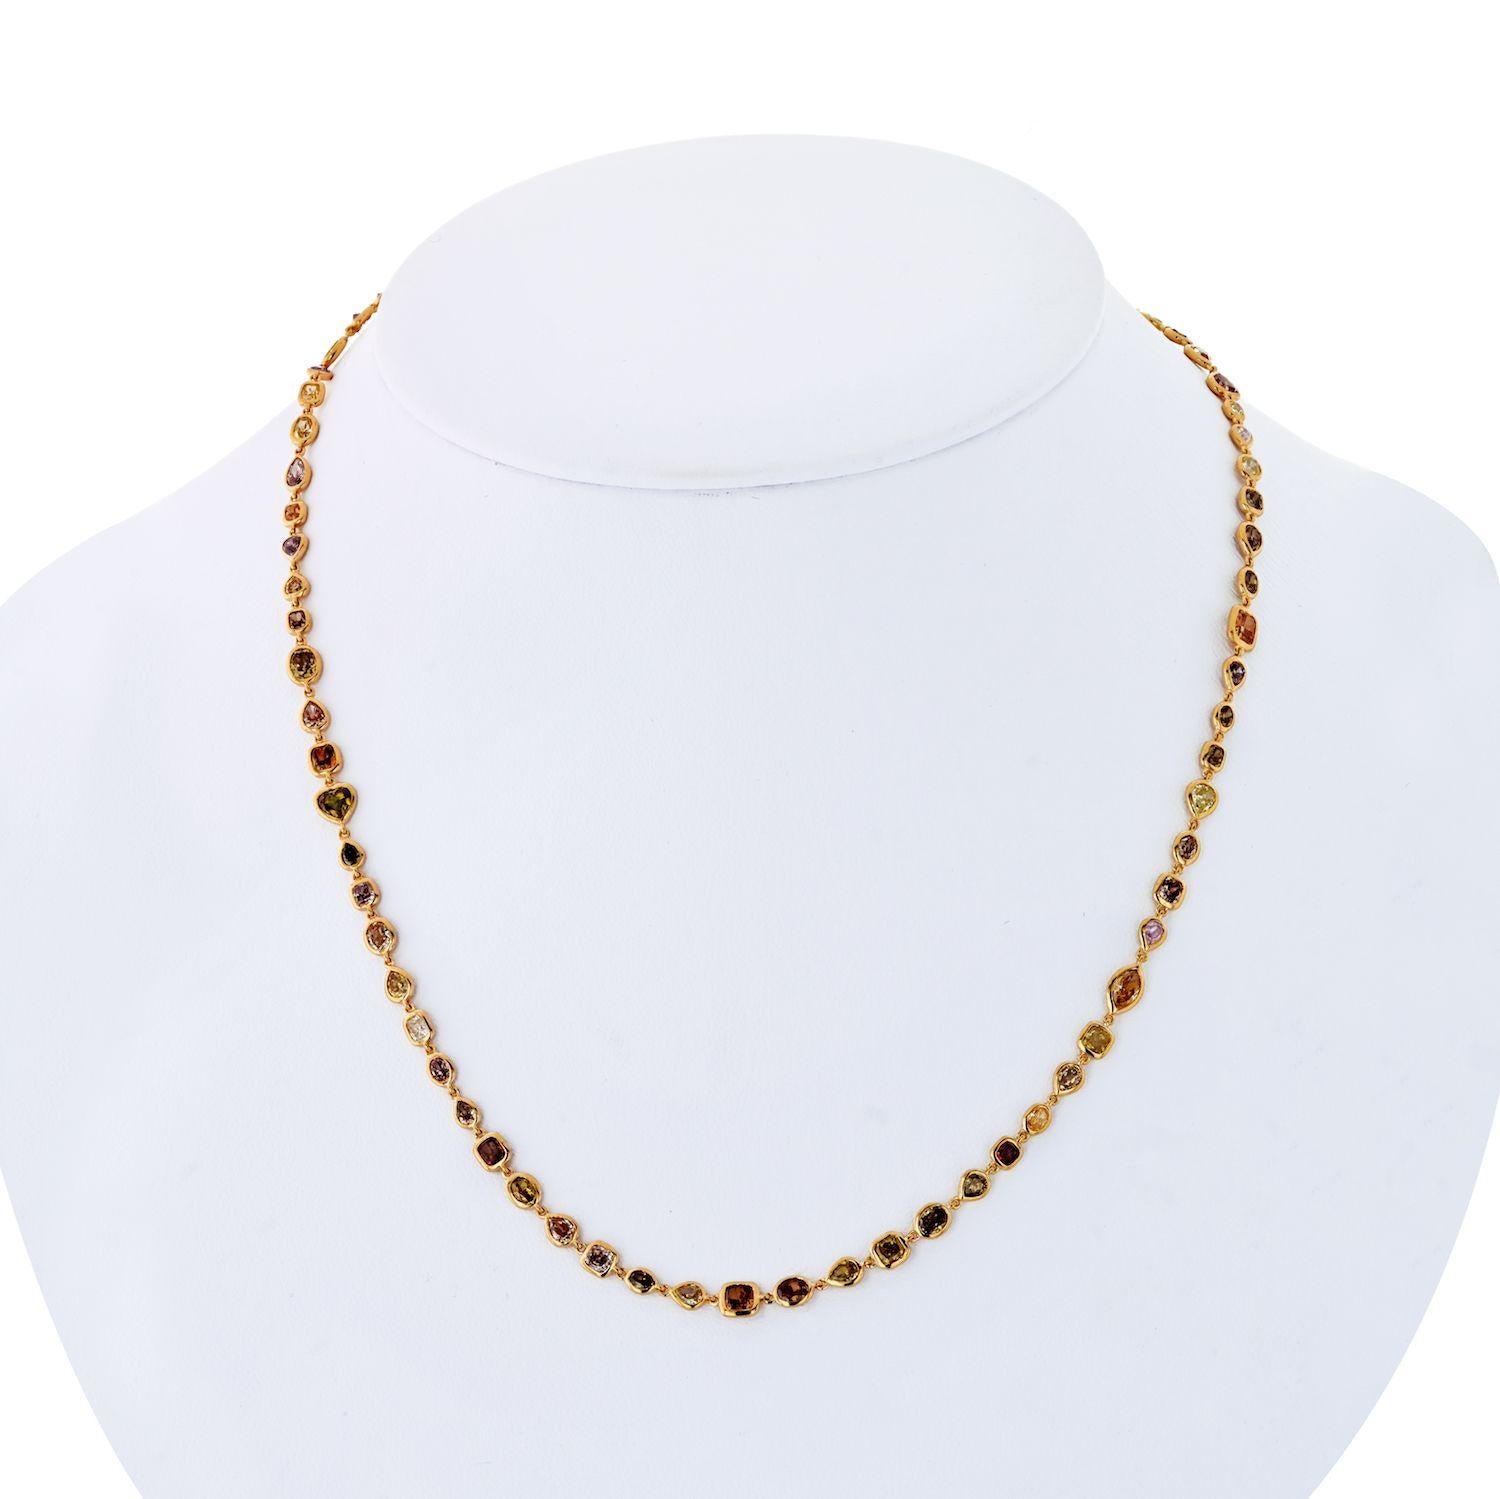 Handmade diamond by the yard necklace crafted in house by our jewelers. Made in 18K yellow gold set with all natural fancy color and white diamonds of different diamond cuts. Total Carat Weight 10.50cts. 
Length: 17 inches. 
Solid strong frames,